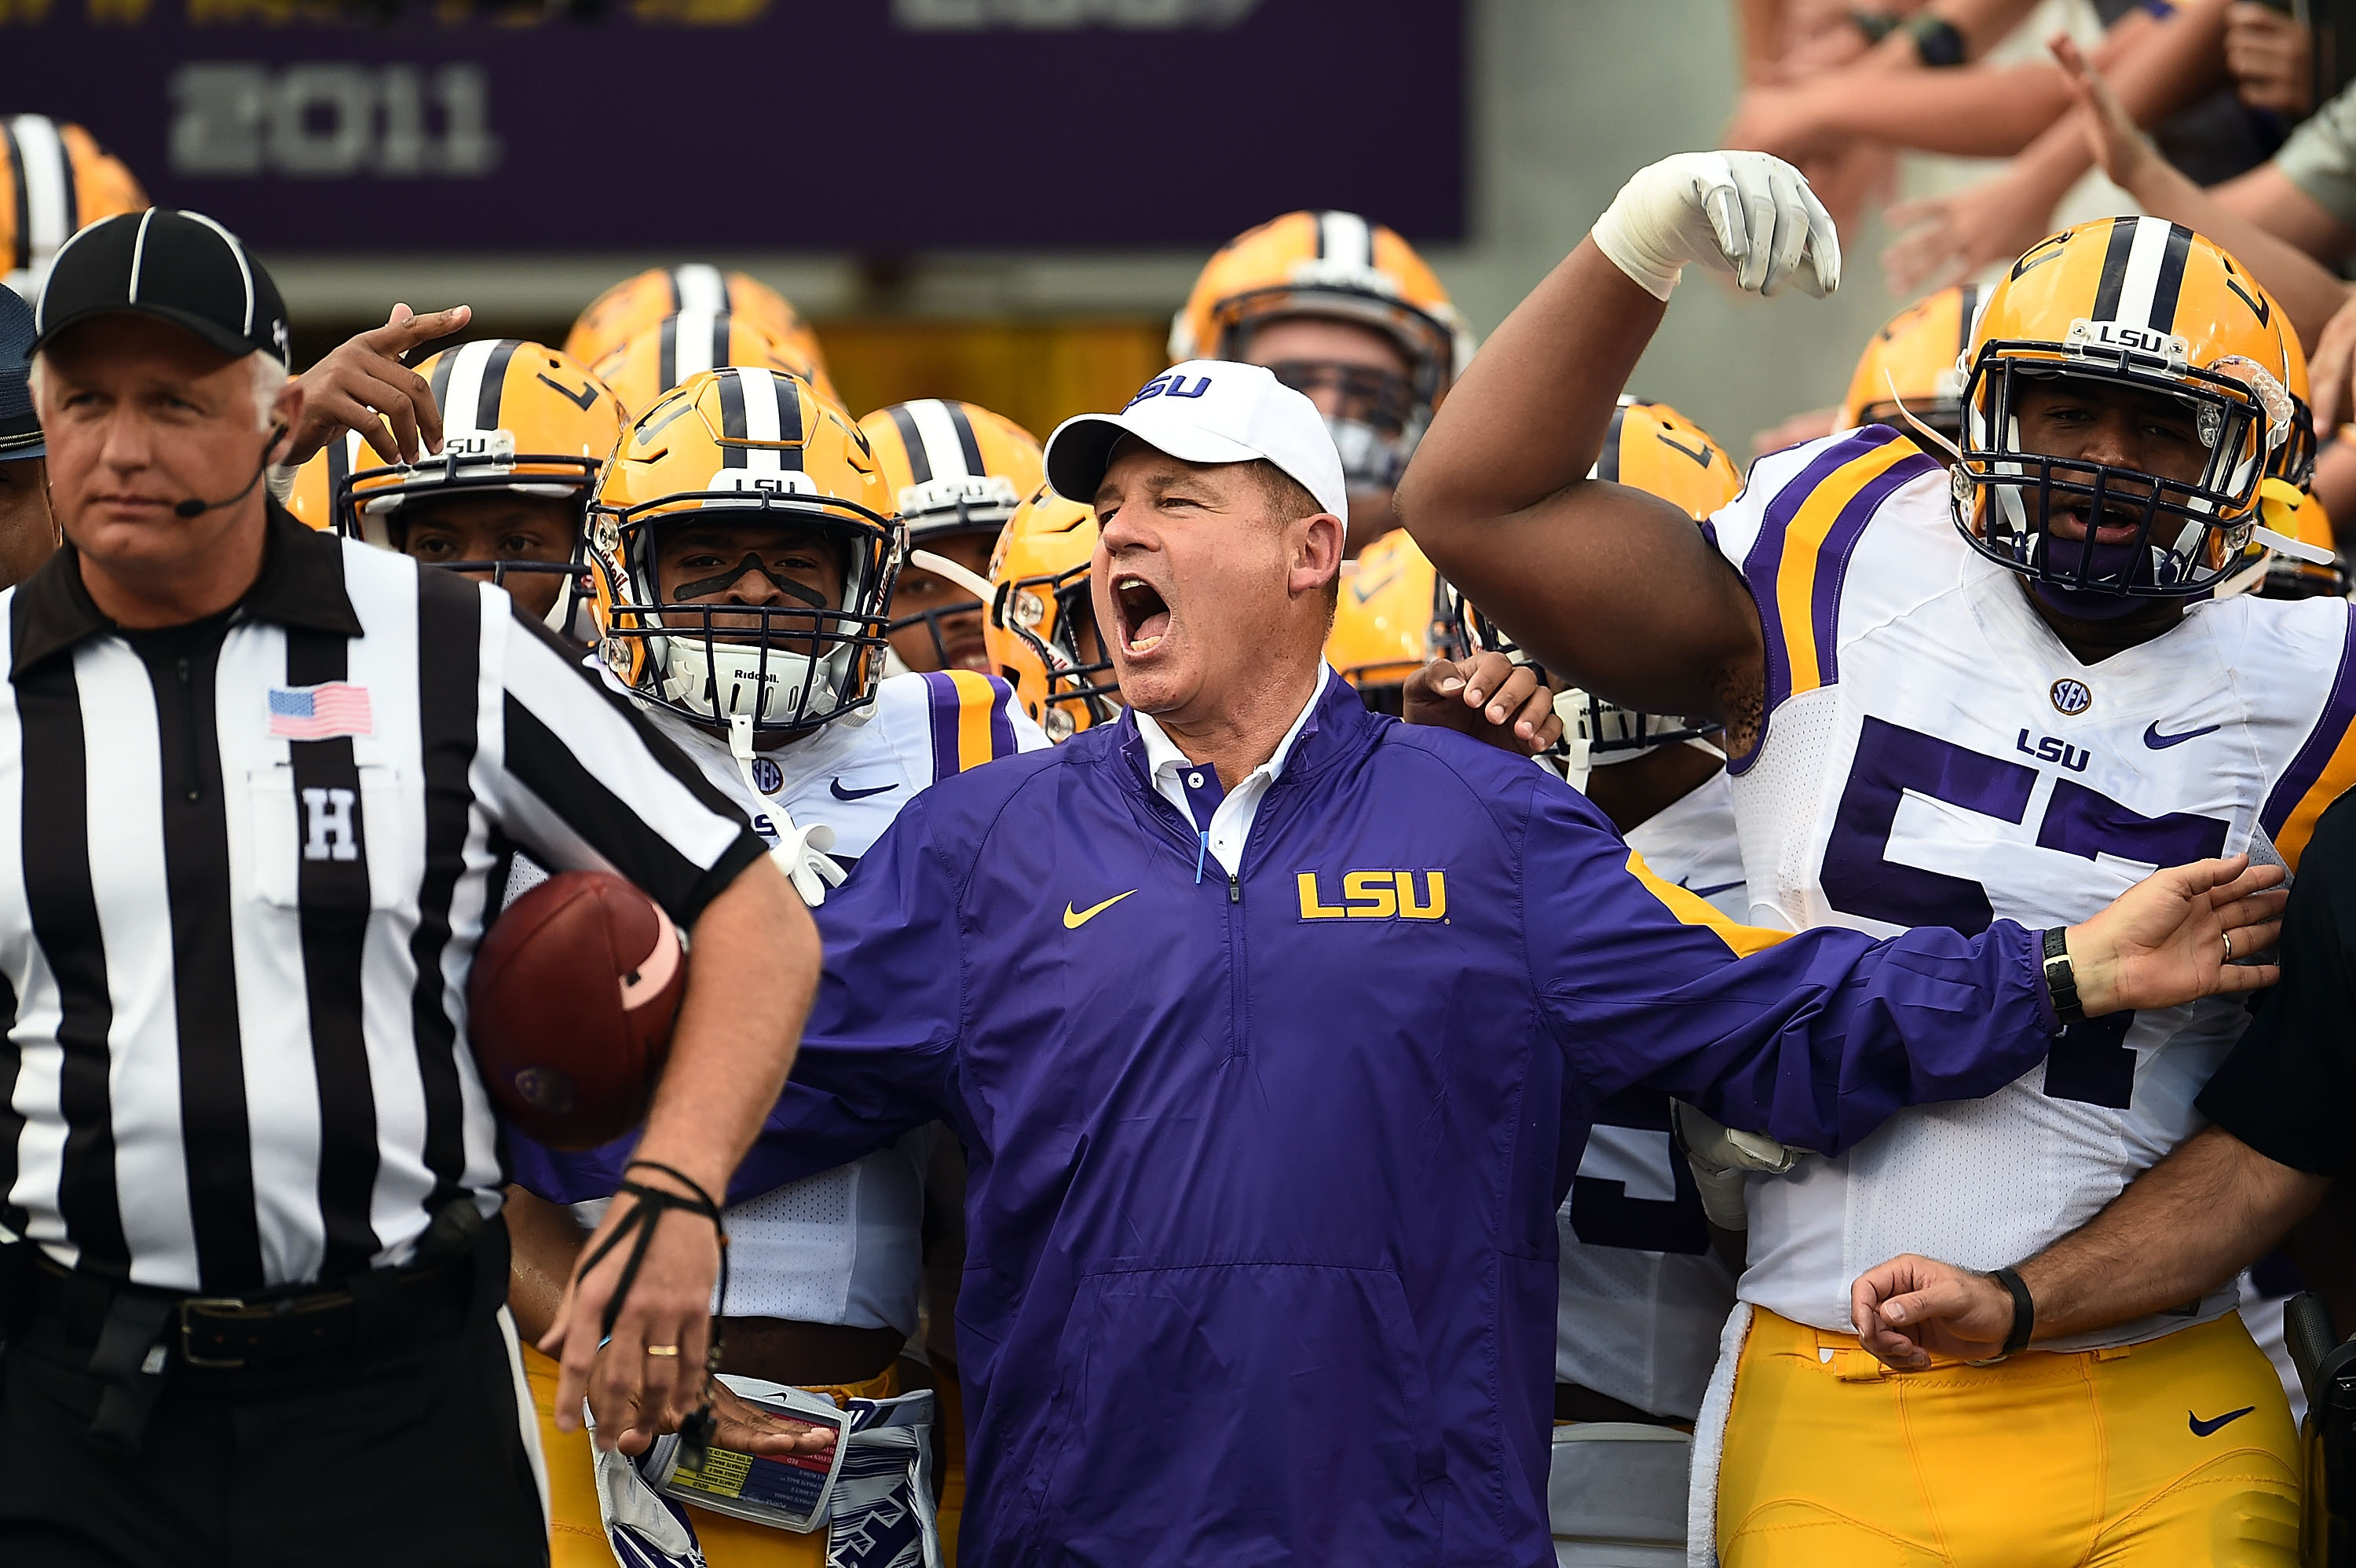 How to Watch LSU vs. Mississippi State Live Stream Online